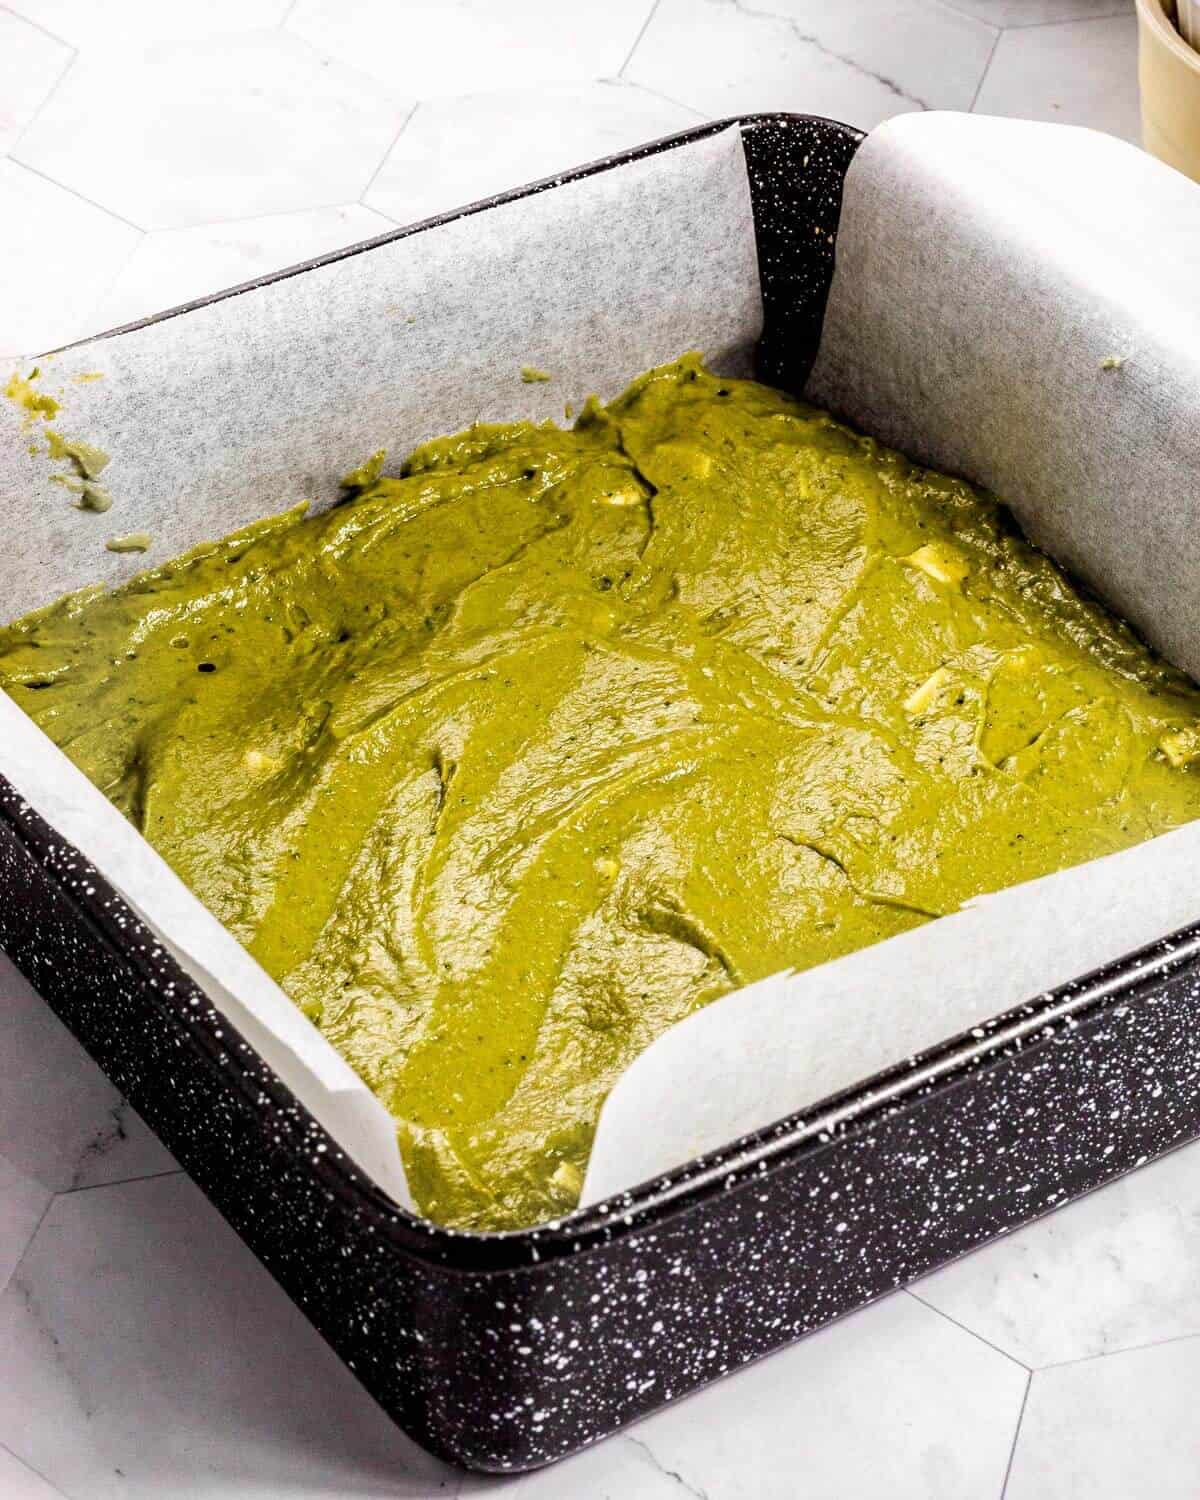 Matcha brownie batter in a baking tin before baking.